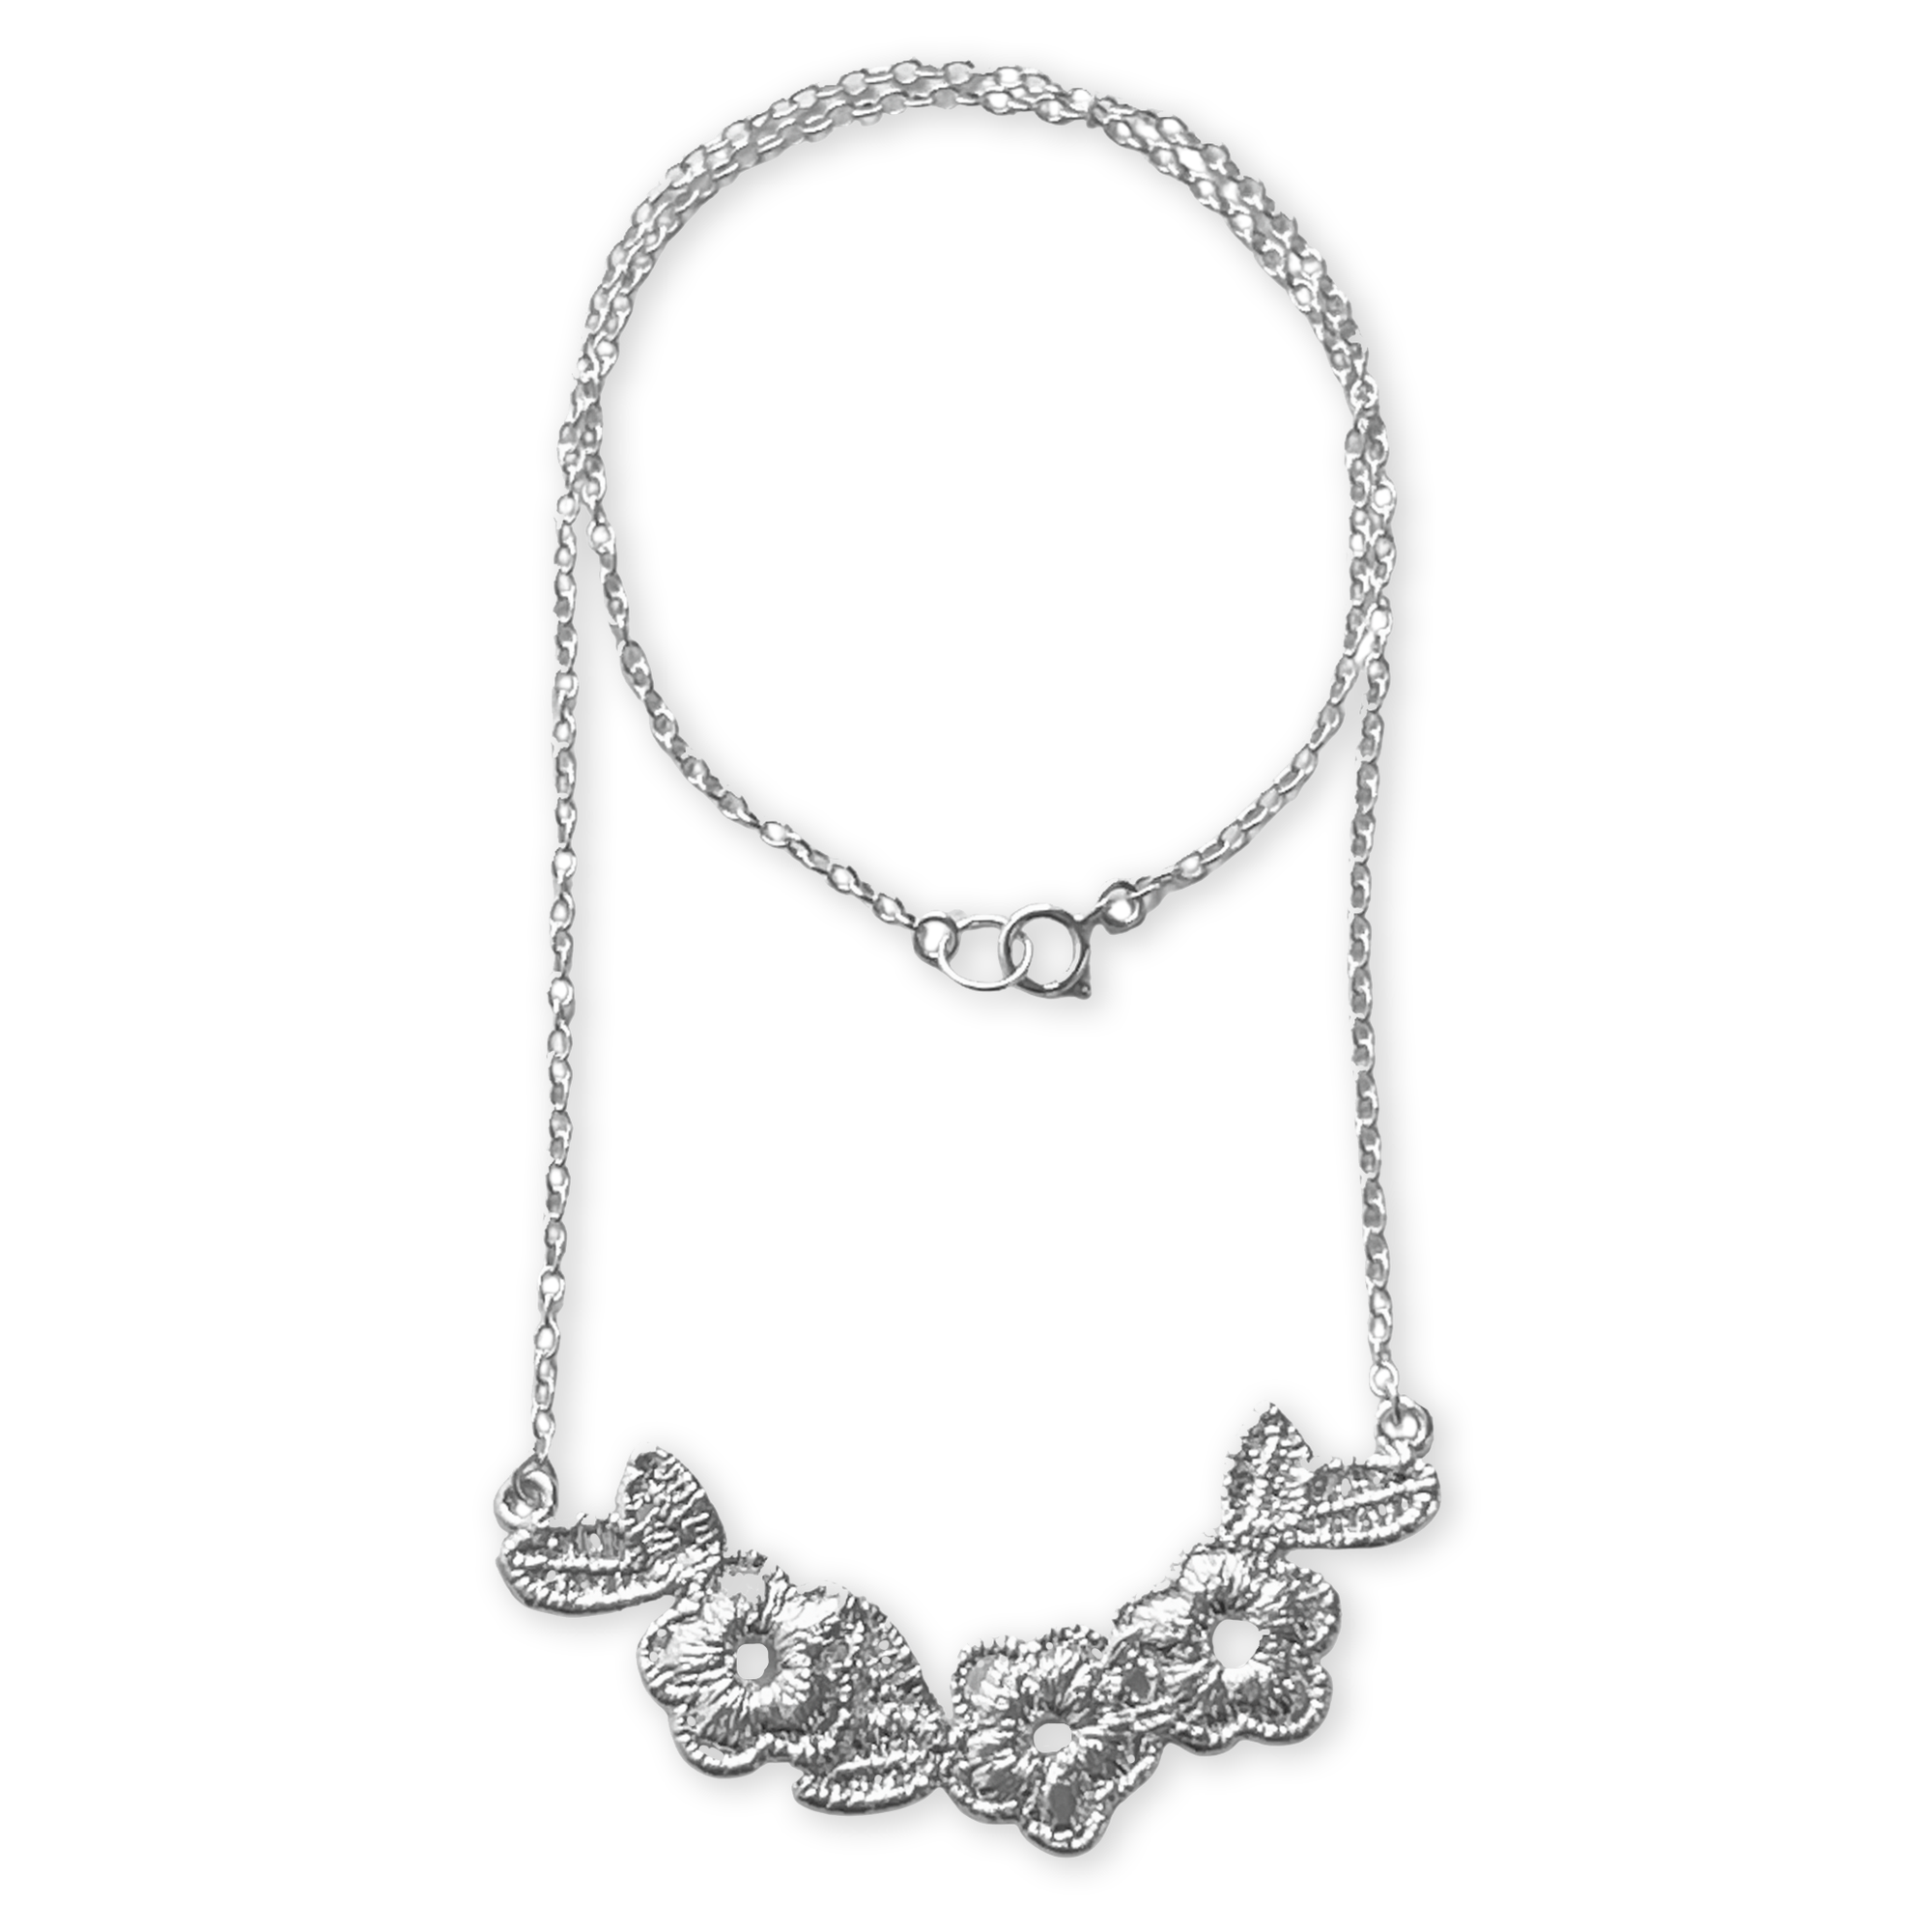 Lace flower garland necklace in sterling silver.